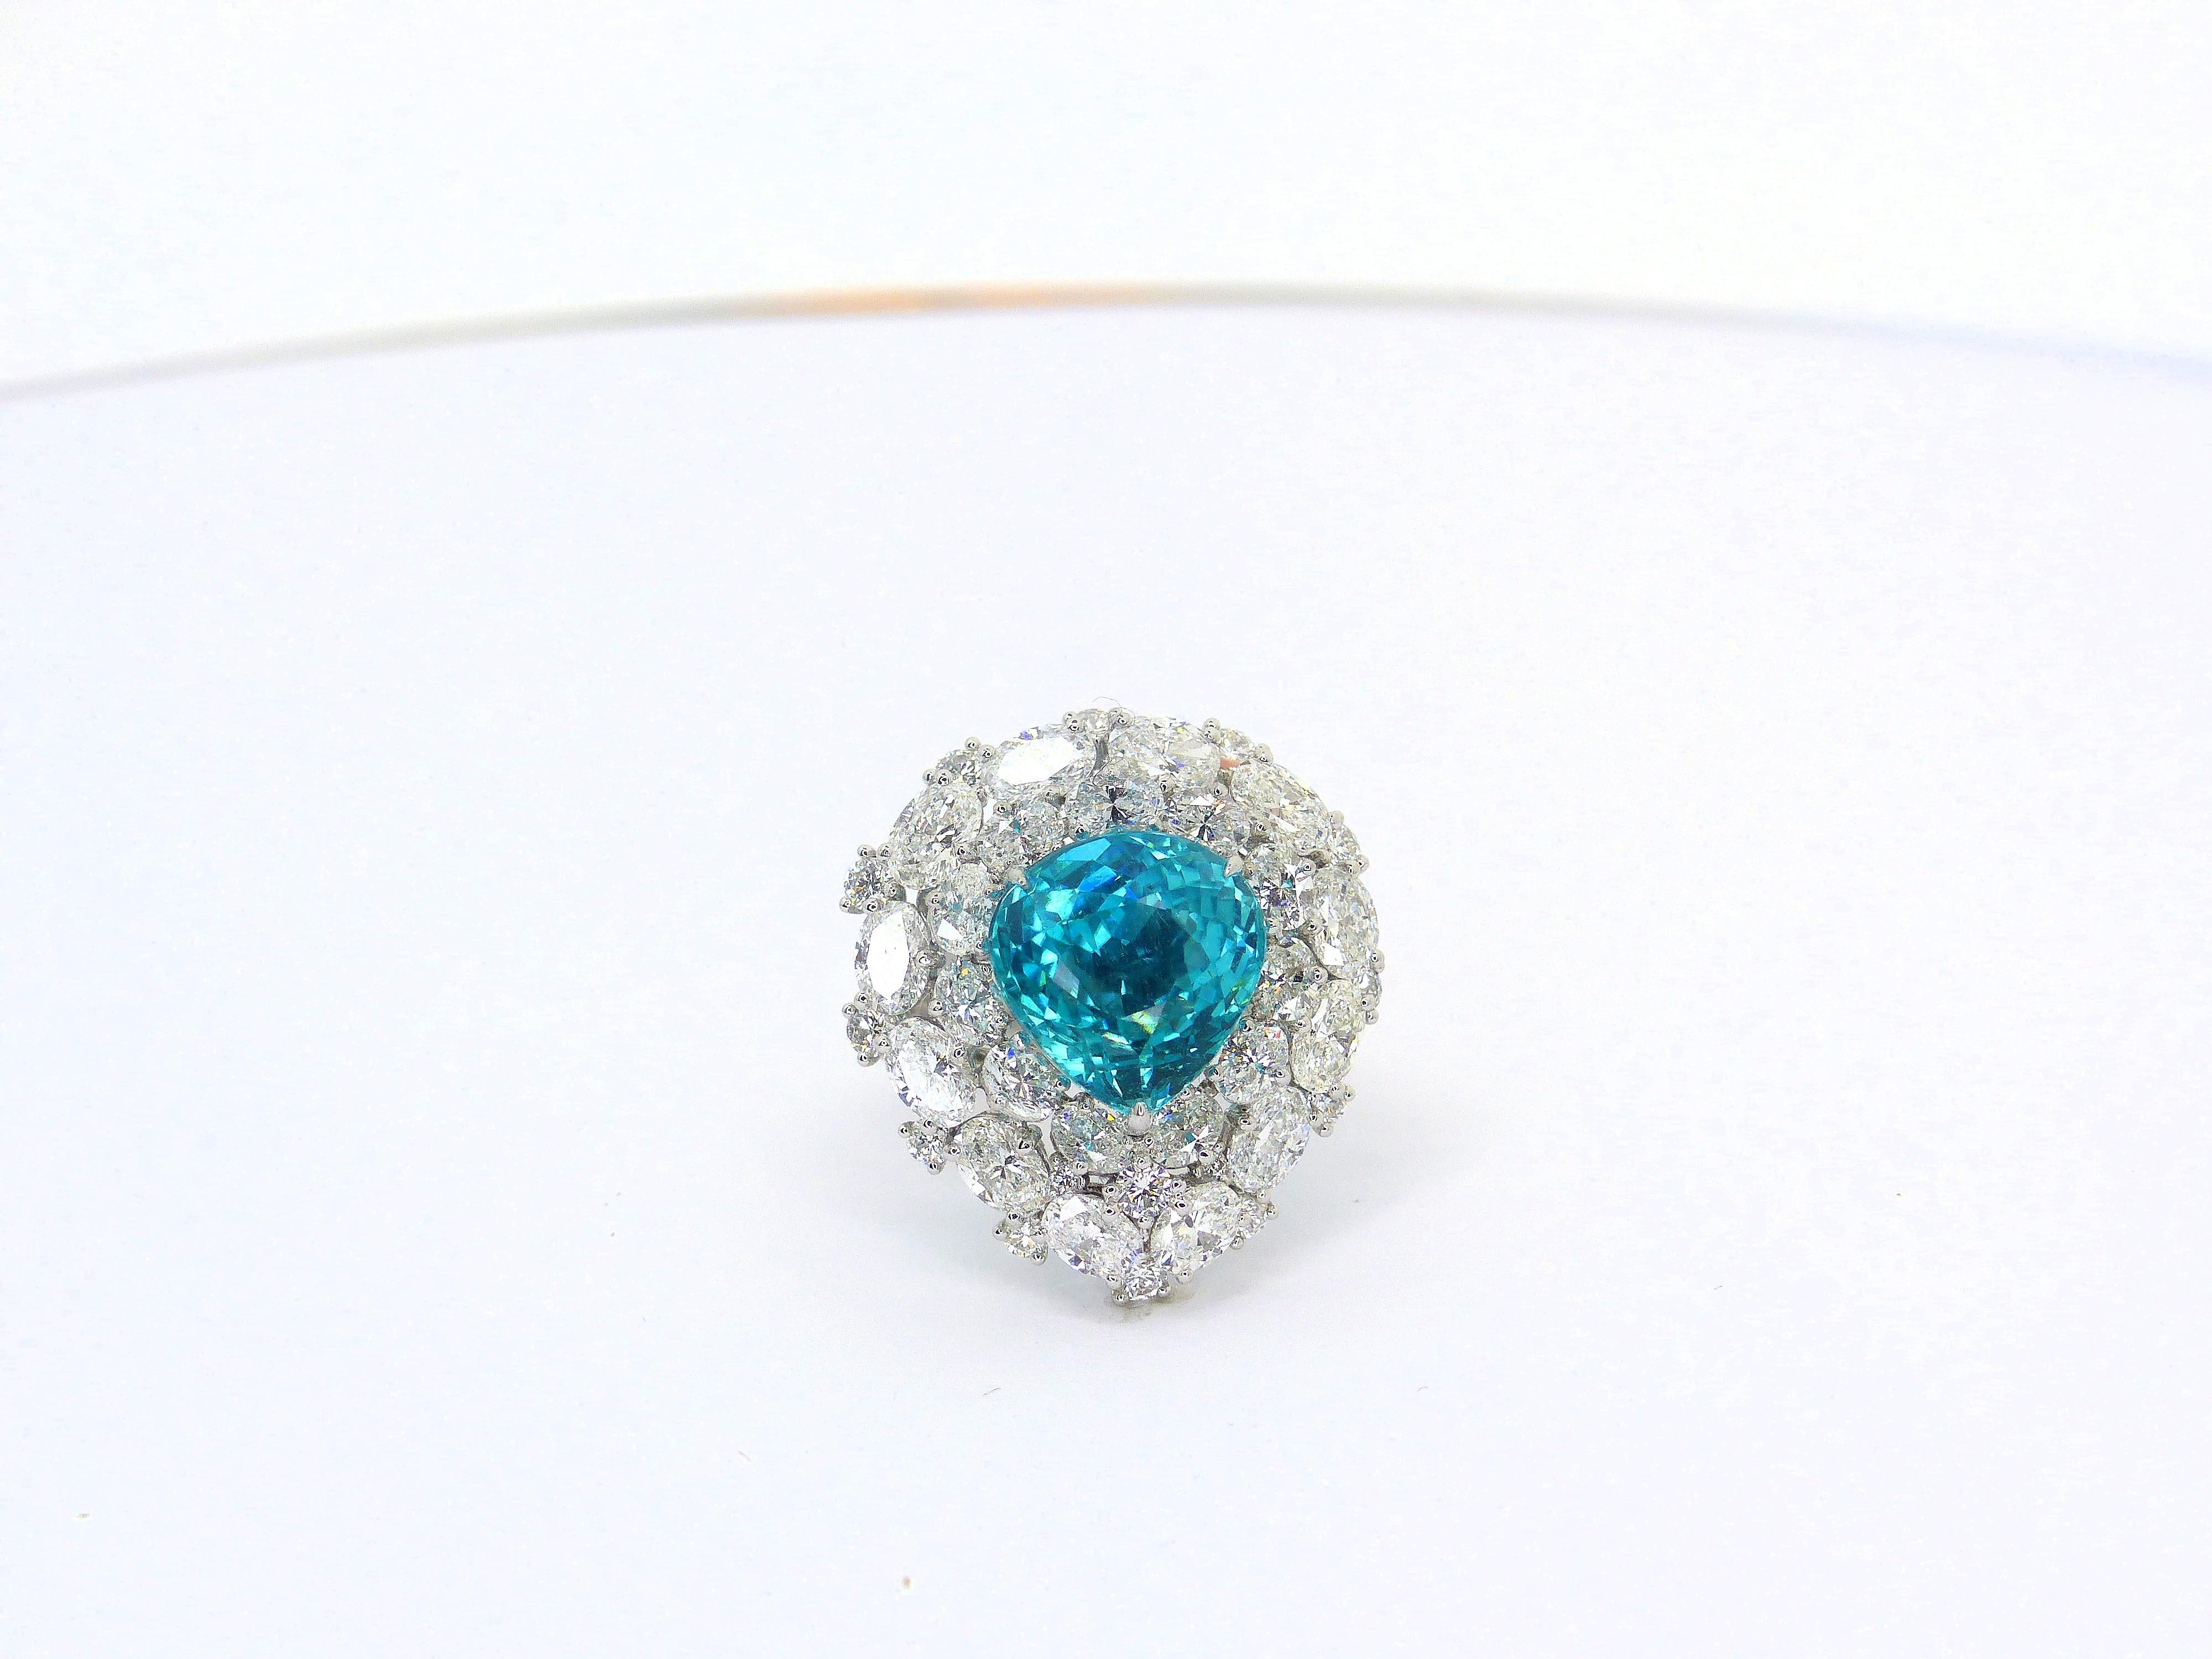 This 950/ Platinum (17,58gr.) Ring is set with 1 top quality Paraiba Tourmaline, Pearshape 12,1x11,7mm, 8,01cts. + Diamonds 5,74cts., D/VS various shapes.

Paraiba Tourmalines are very popular and rare gemstones. The color is electric neon